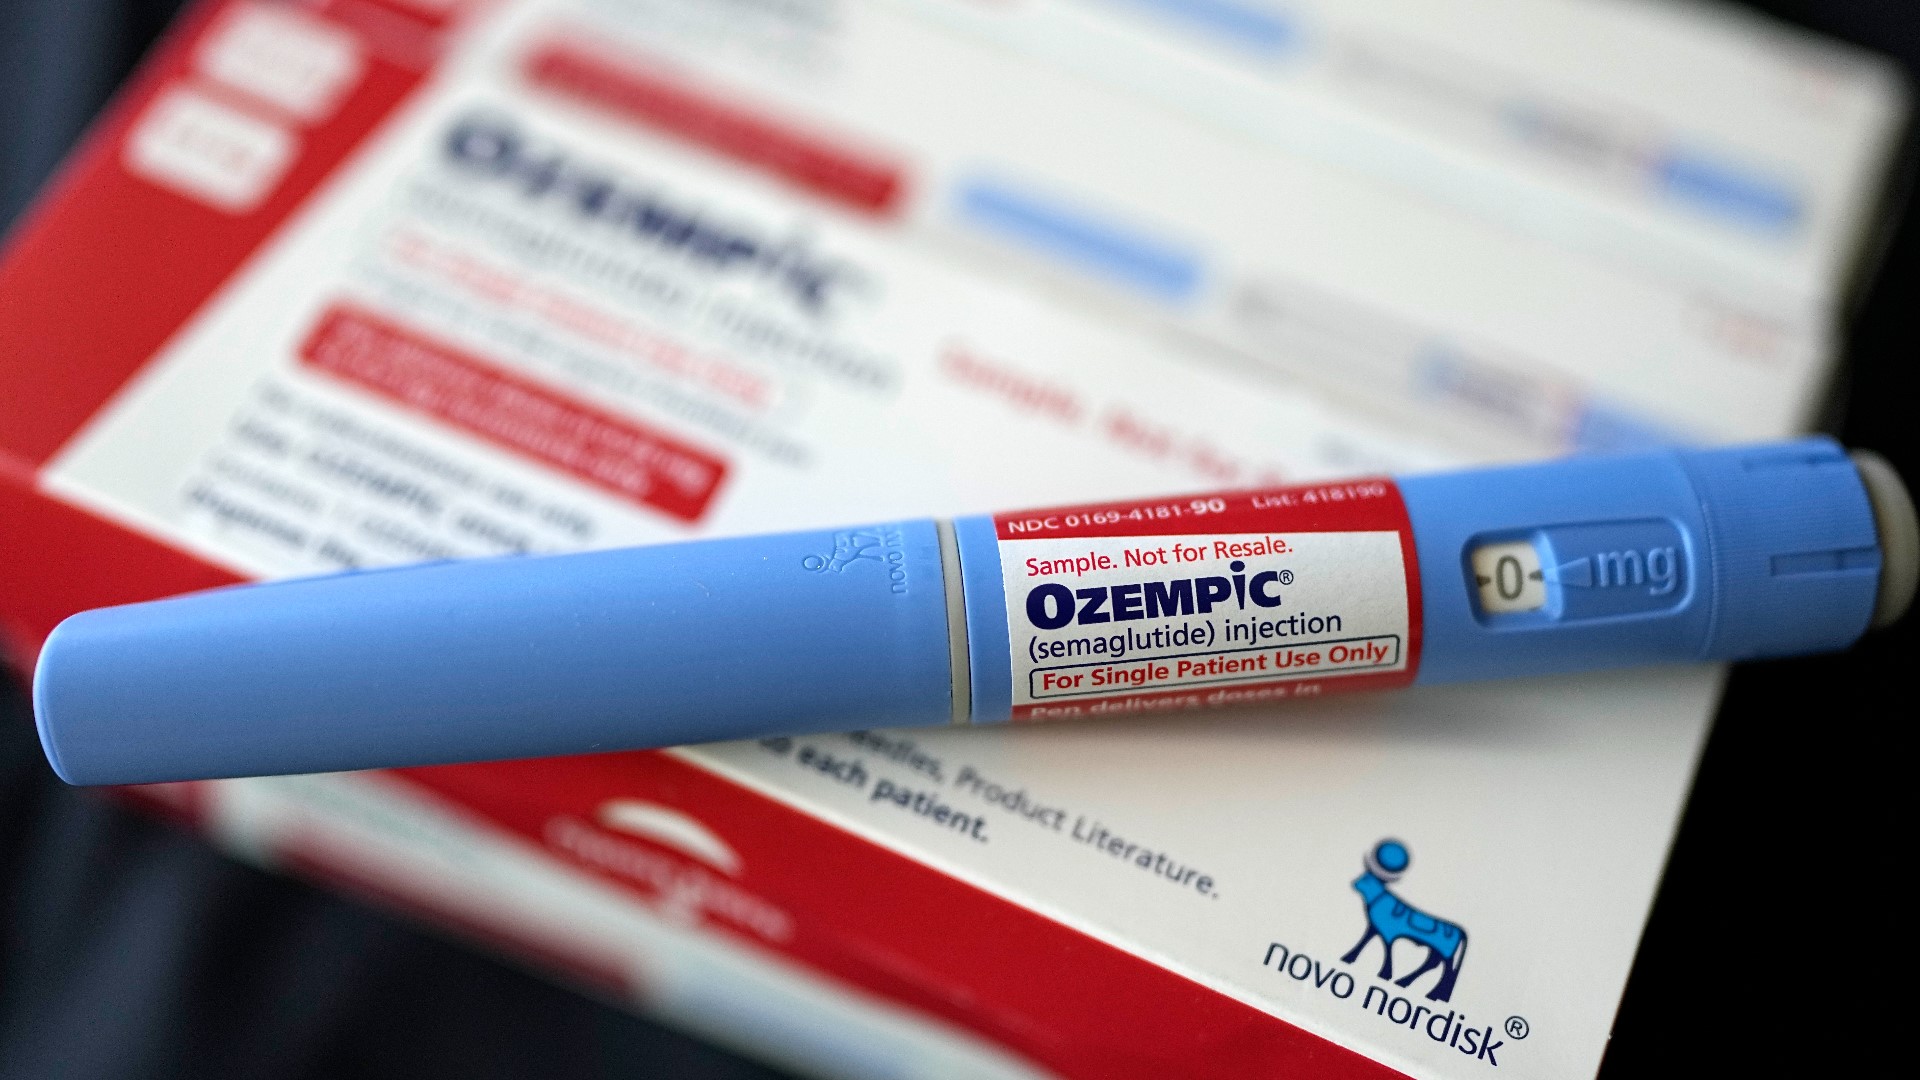 Lawyers allege the makers of Ozempic and Mounjaro, two diabetes and weight-loss drugs, failed to warn patients that the medications can cause stomach paralysis.